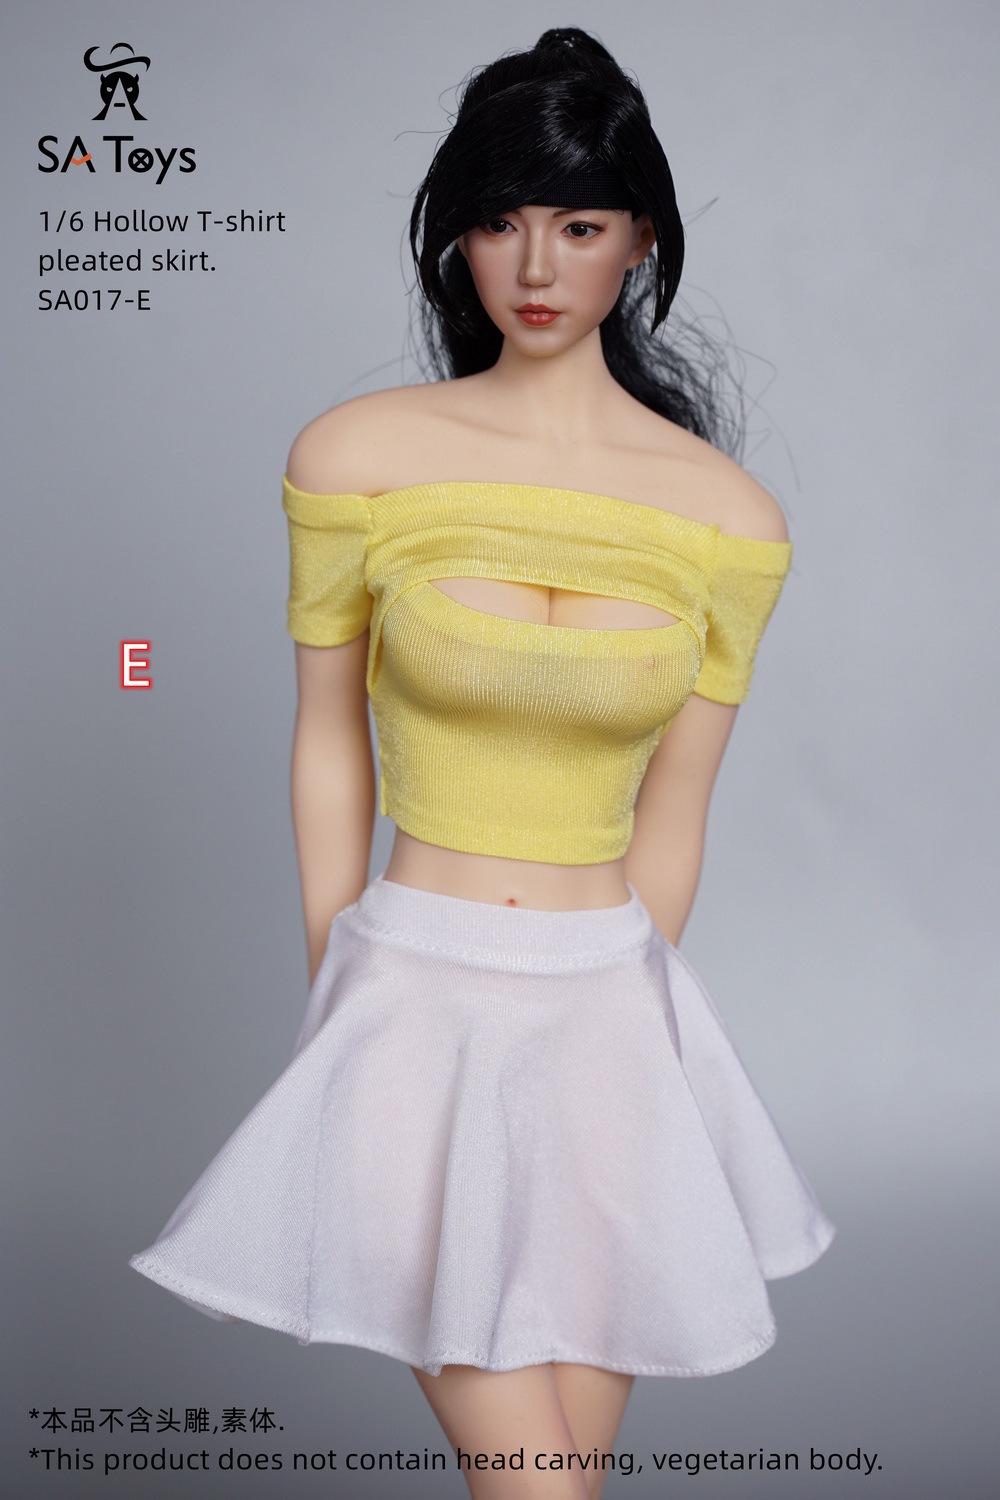 T-shirtpleatedskirt - NEW PRODUCT: SA Toys: 1/6 Personalized Poster Style Tight Dress/ Hollow T-shirt Pleated Skirt/Side Zipper Tight Skirt [Various styles available]  16560510